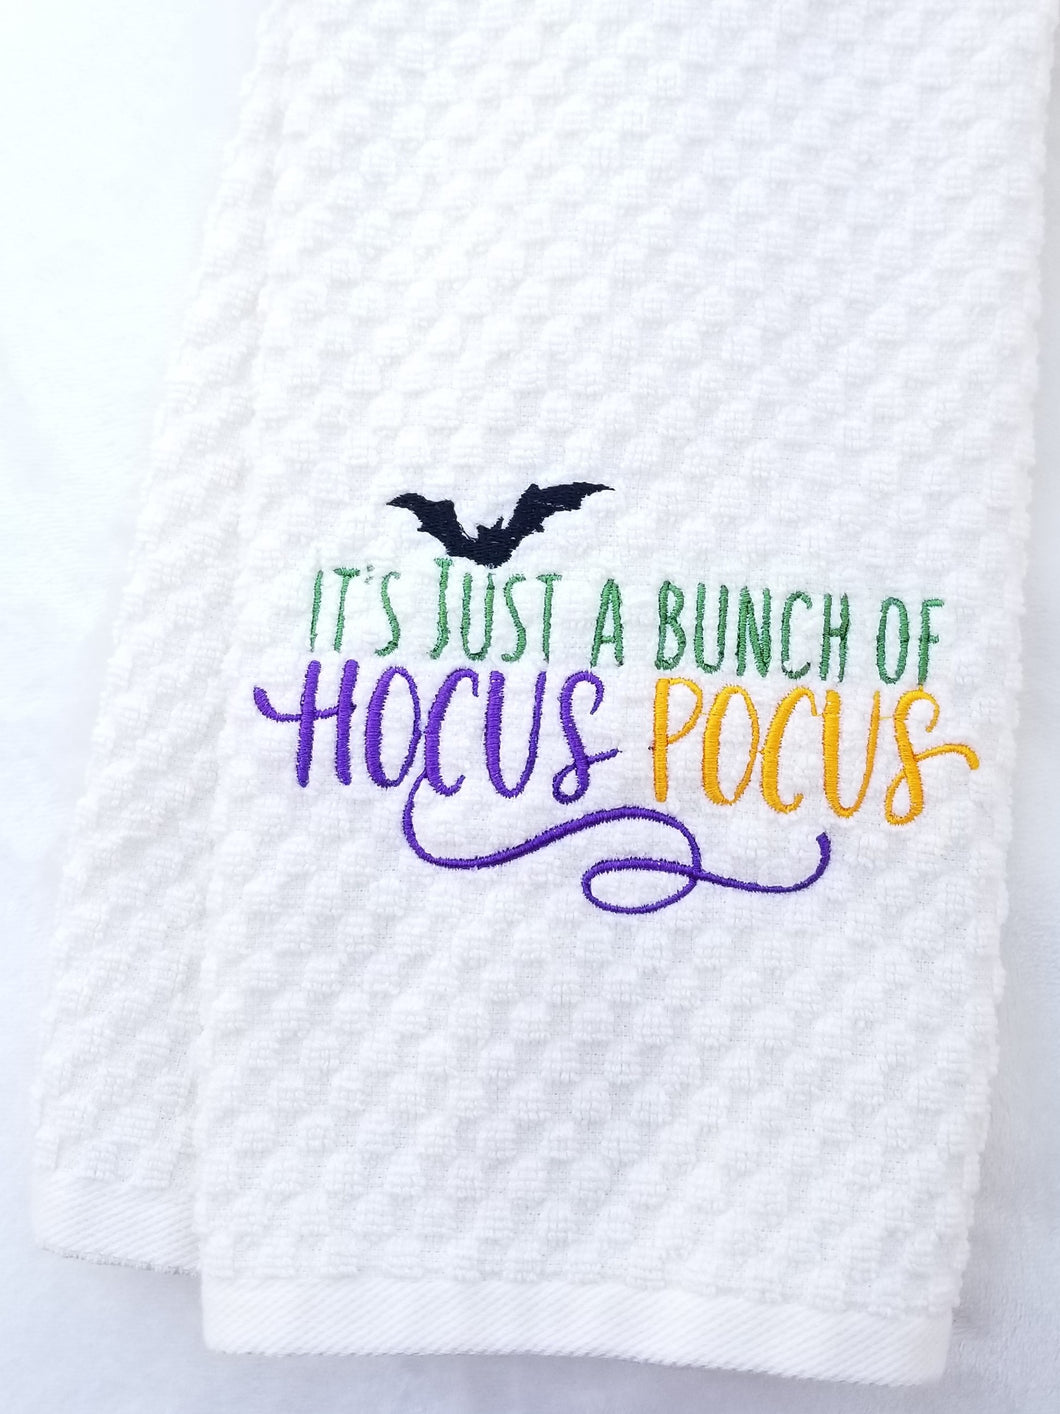 Hand Towel Halloween Embroidered Ivory Towel